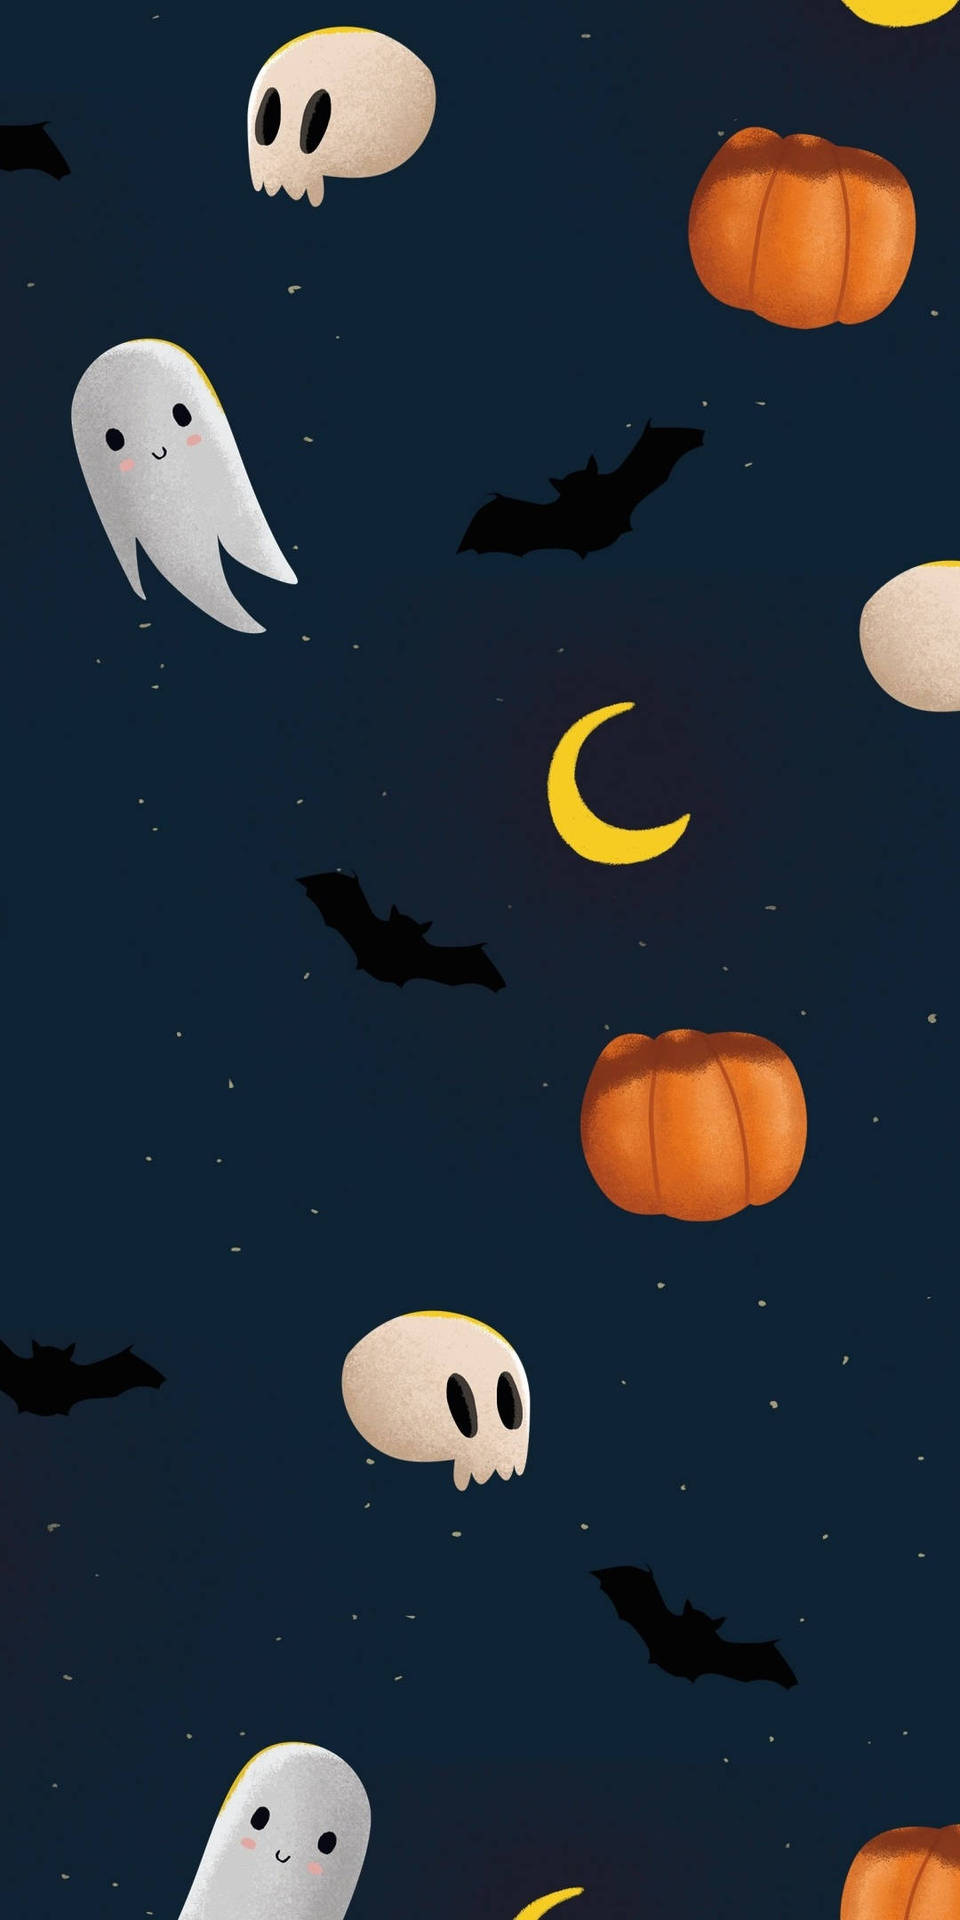 Trick-or-Treat With This Cute Halloween Phone Wallpaper